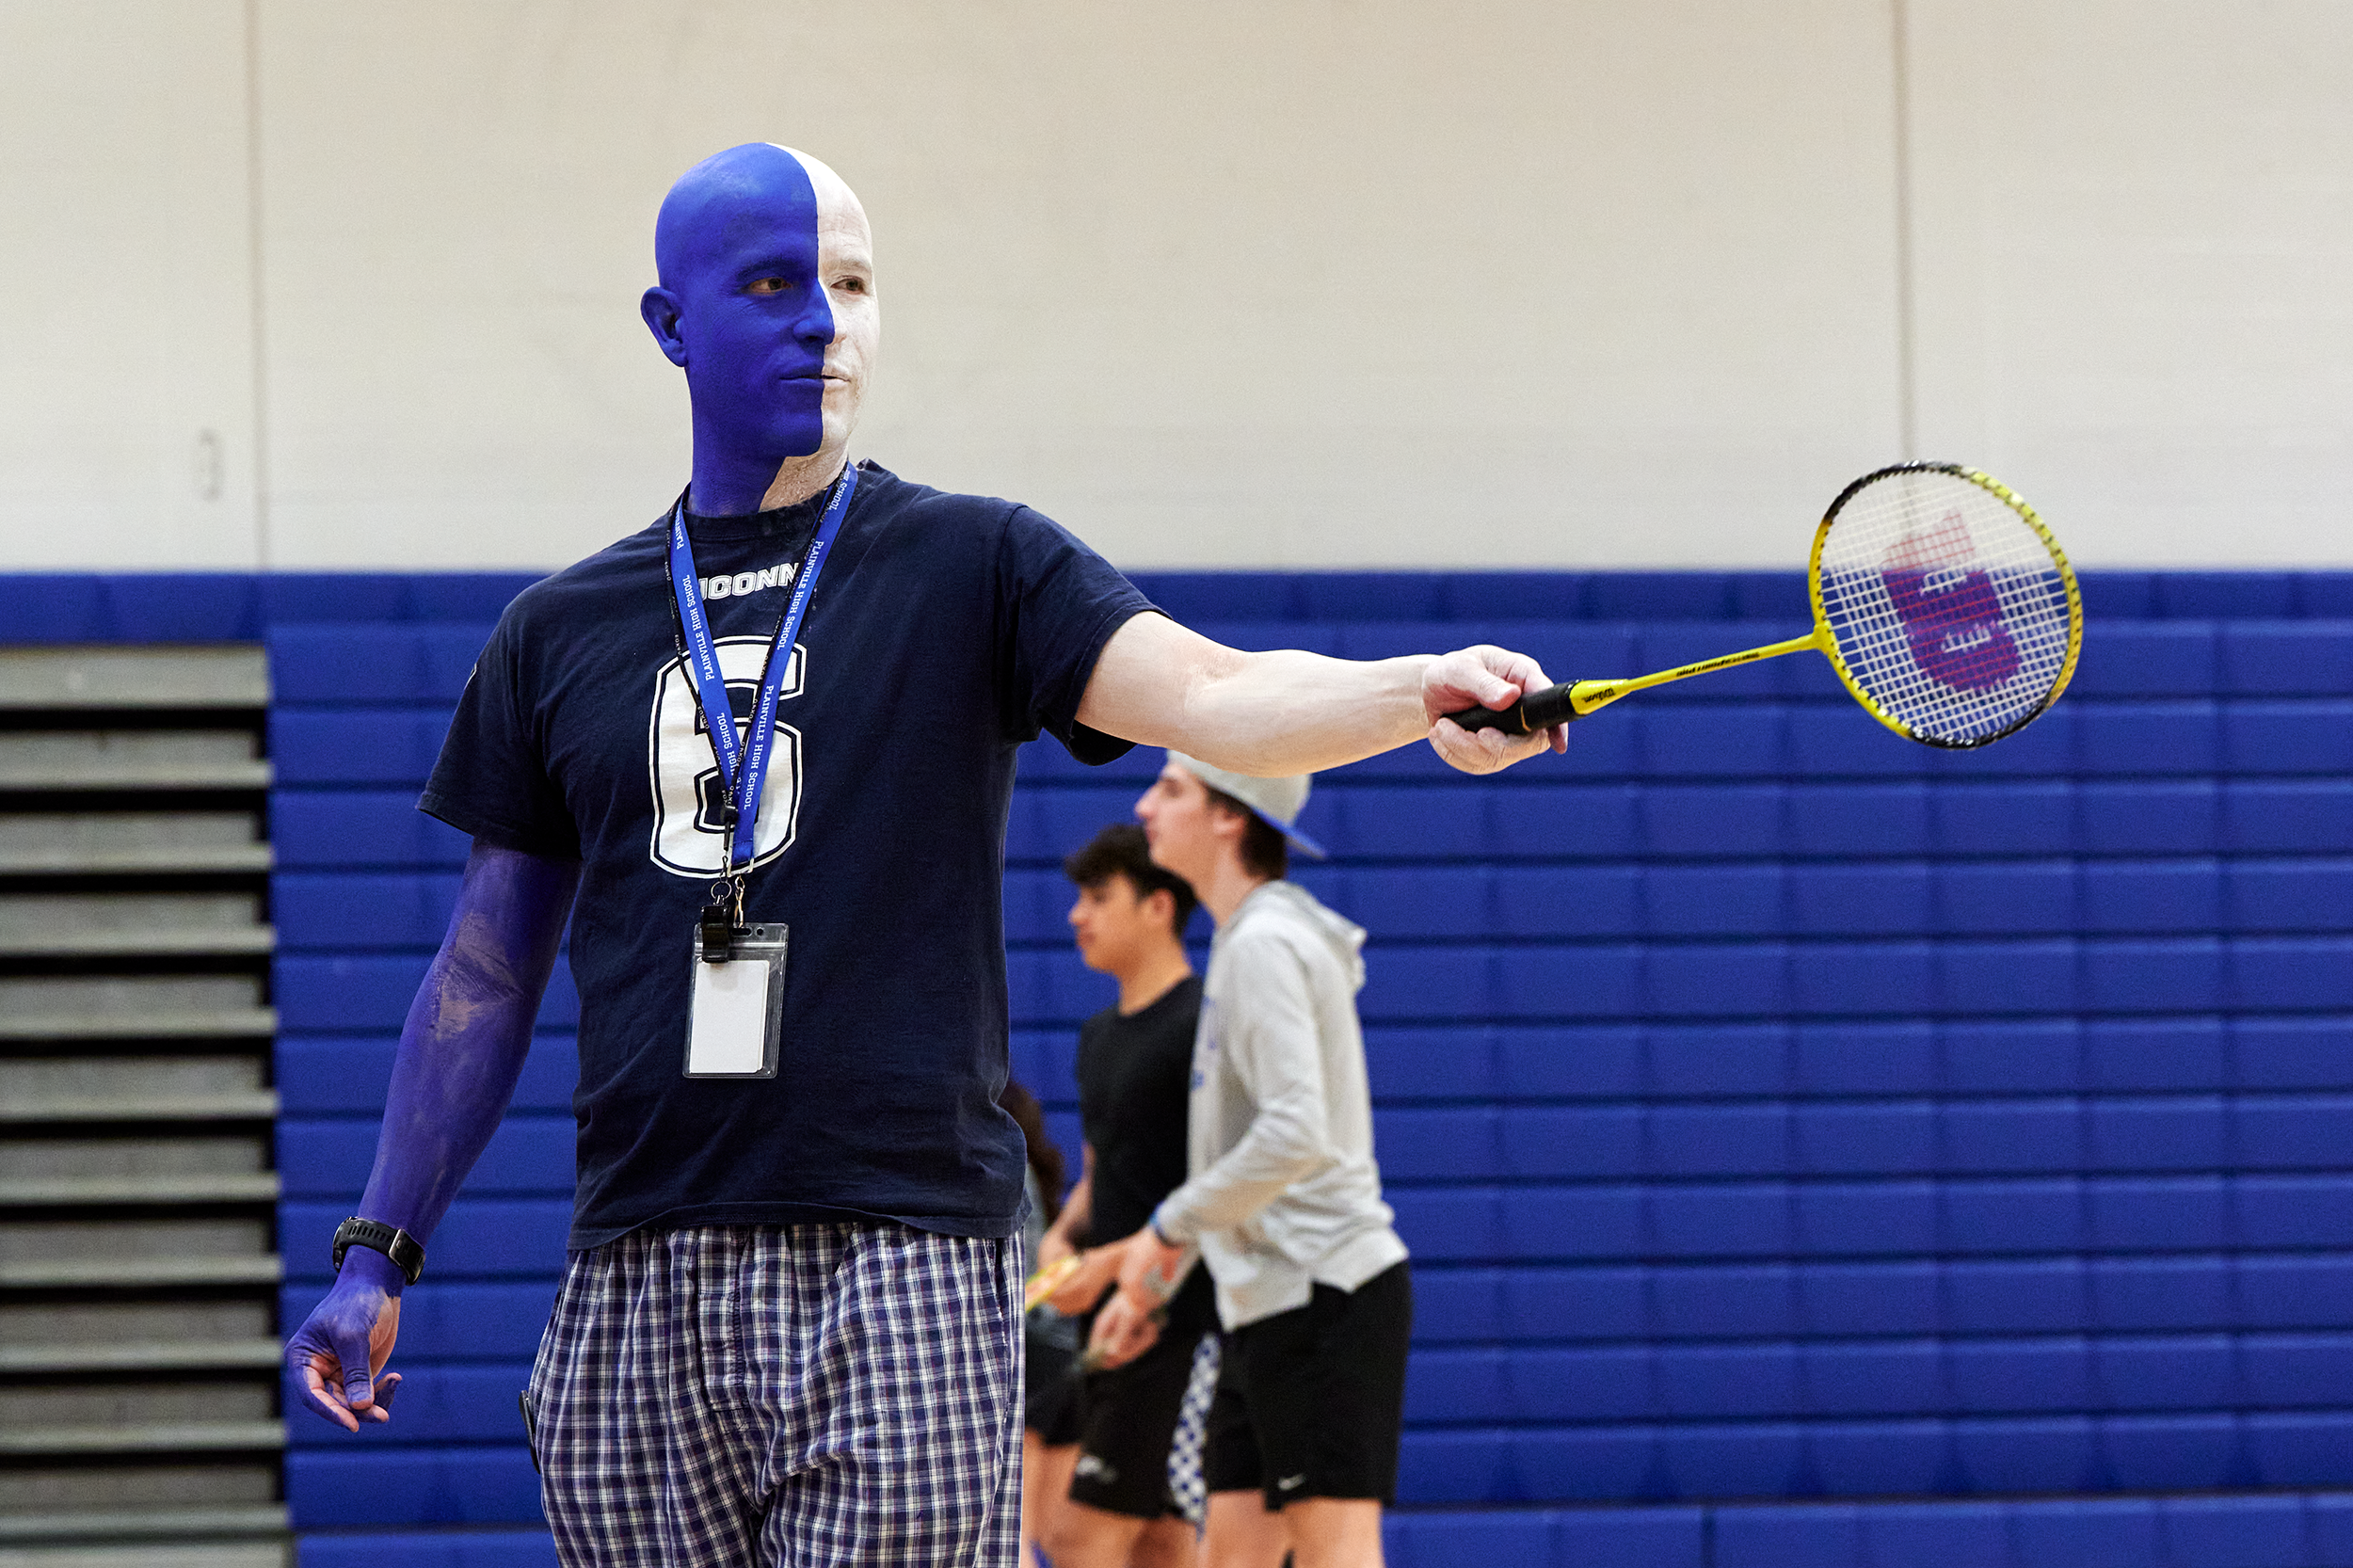 Dale Nosel in blue and white split body paint leads a gym class at Plainville High School